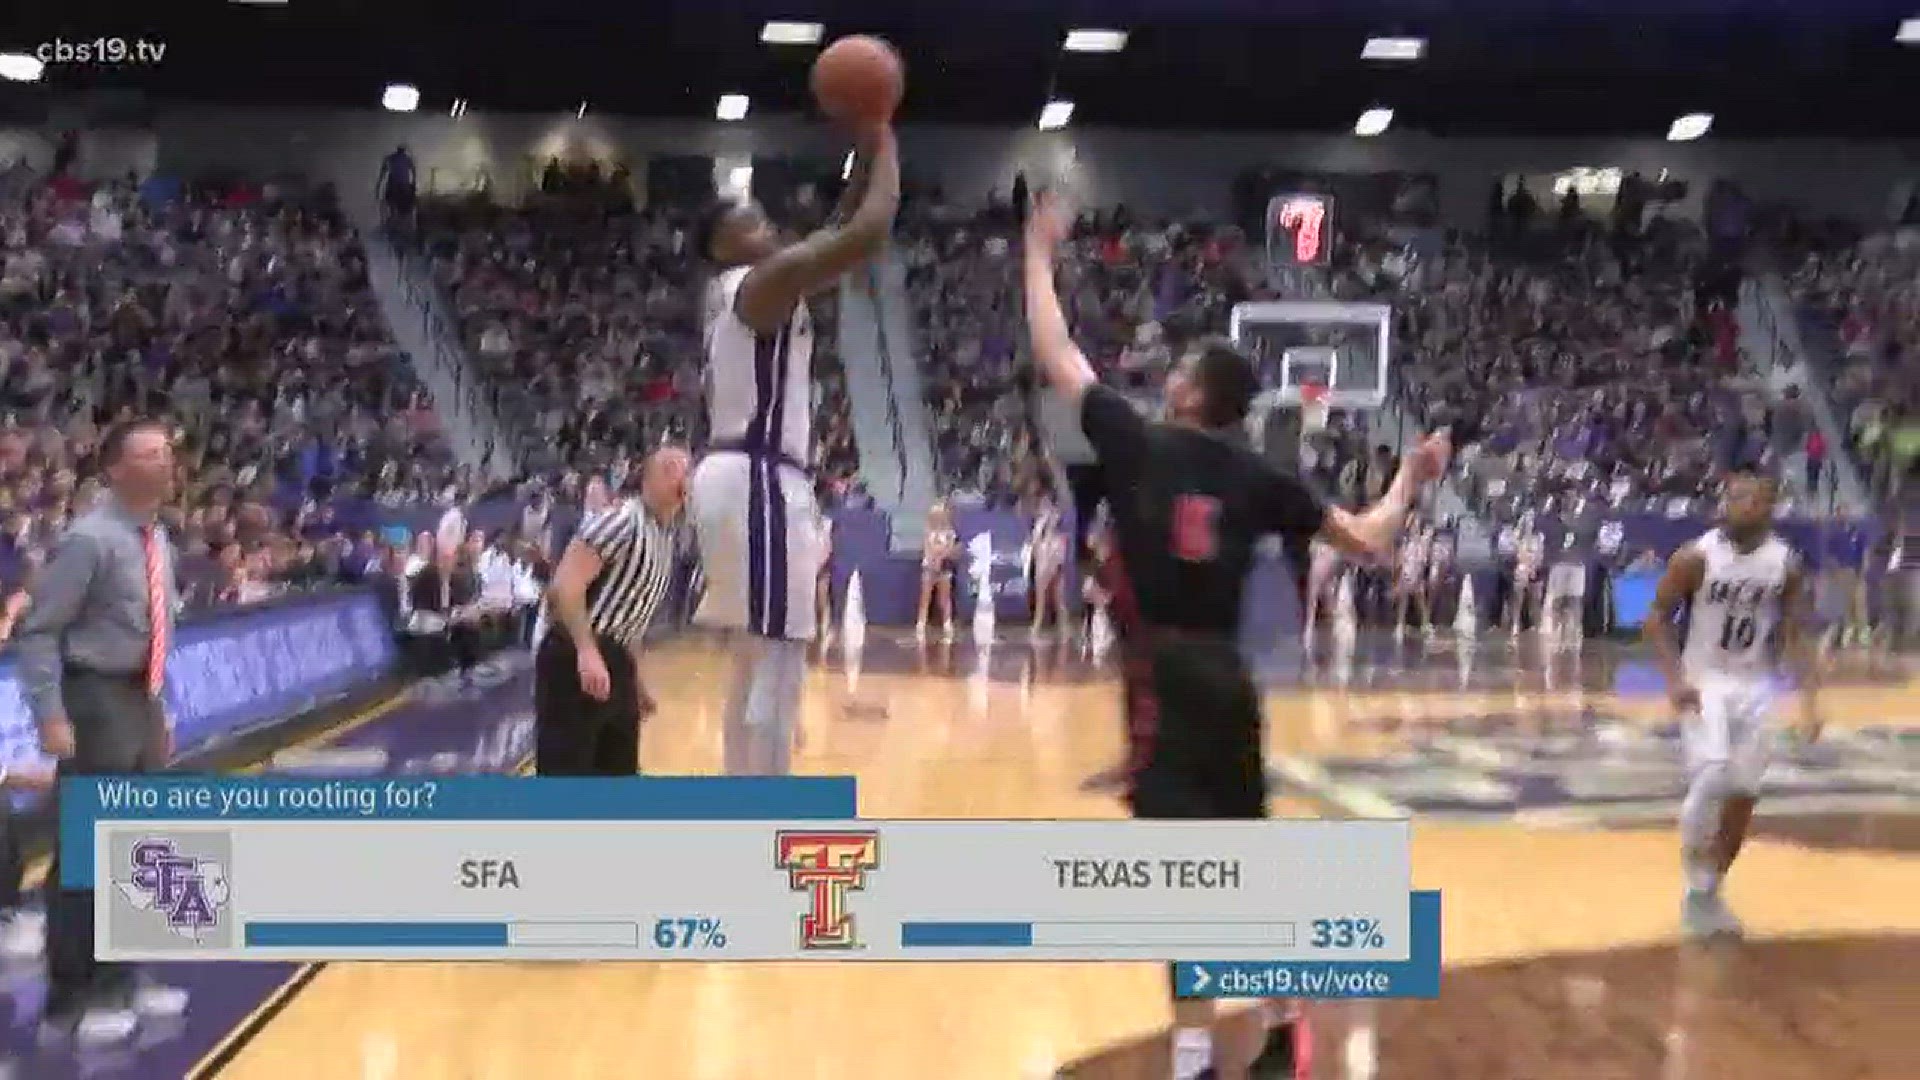 What do SFA fans think of the upcoming game between SFA and Texas Tech?